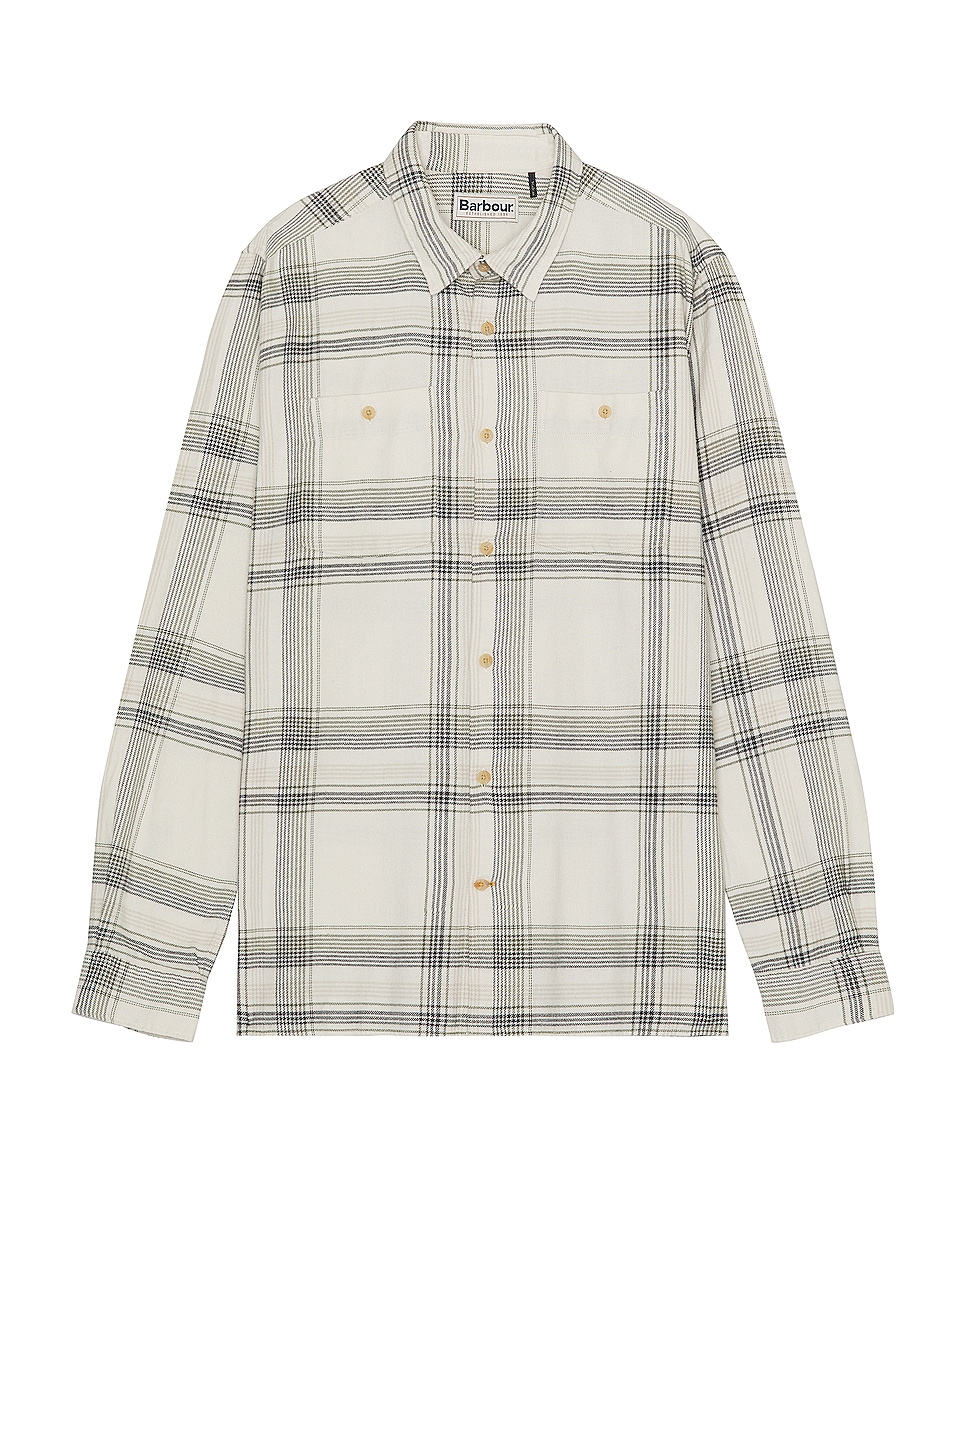 Image 1 of Barbour Langton Tailored Shirt in Beige